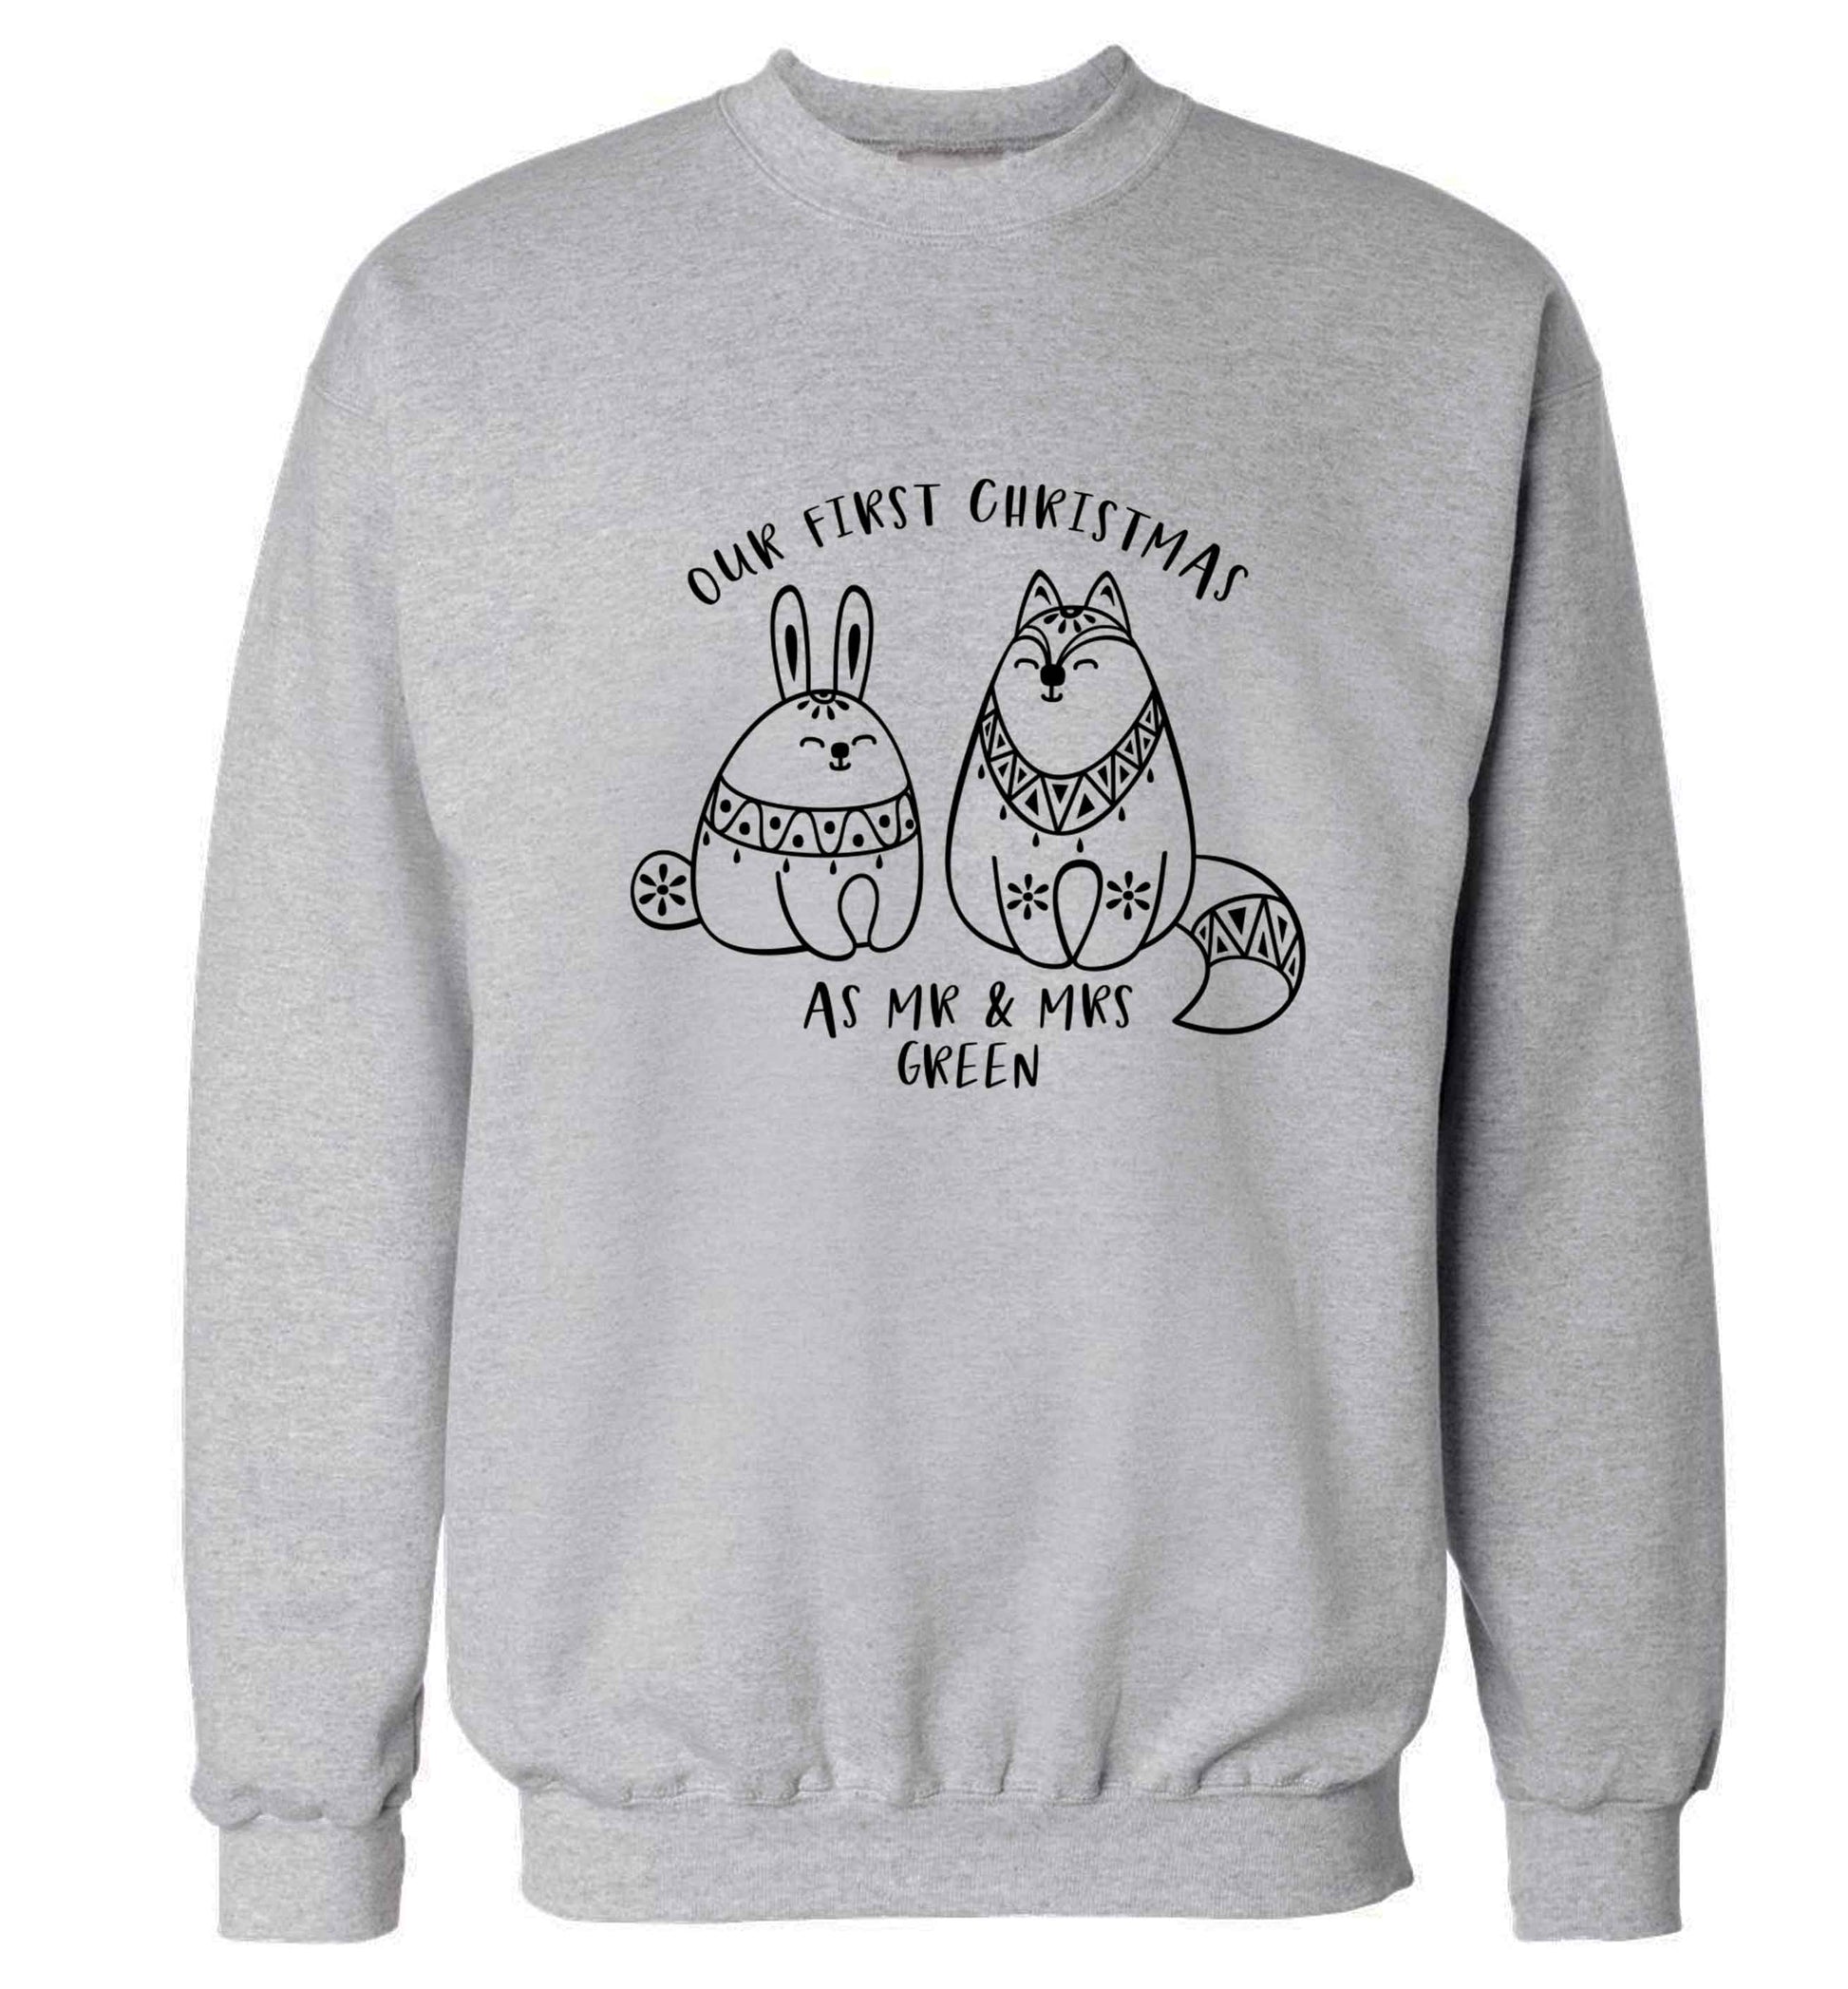 Our first Christmas as Mr & Mrs personalised Adult's unisex grey Sweater 2XL